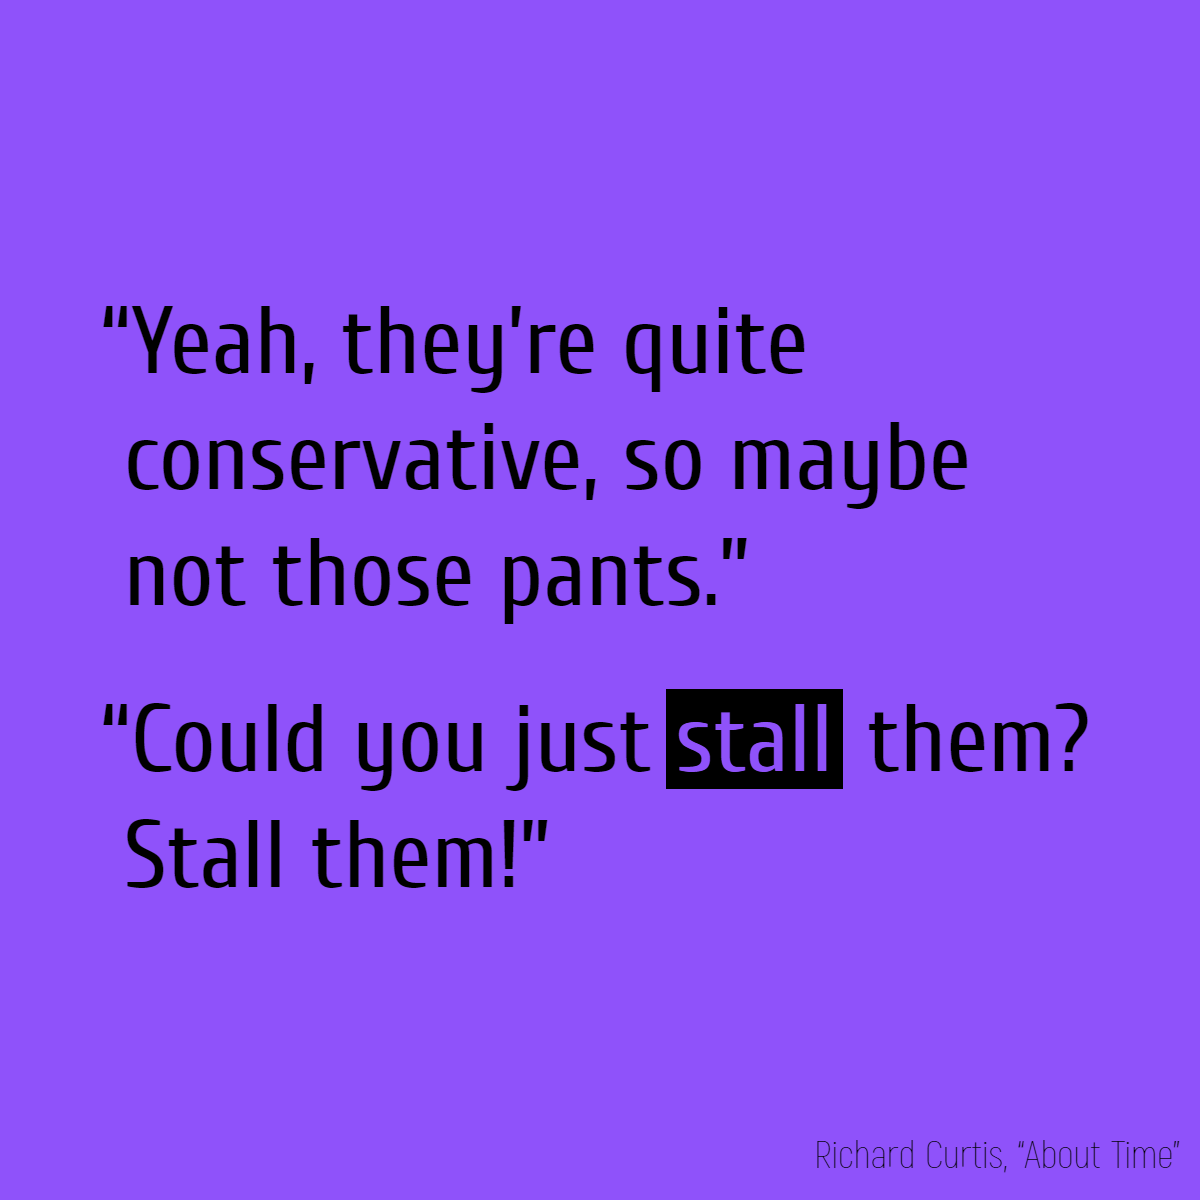 “Yeah, they're quite conservative, so maybe not those pants.” “Could you just stall them? Stall them!”